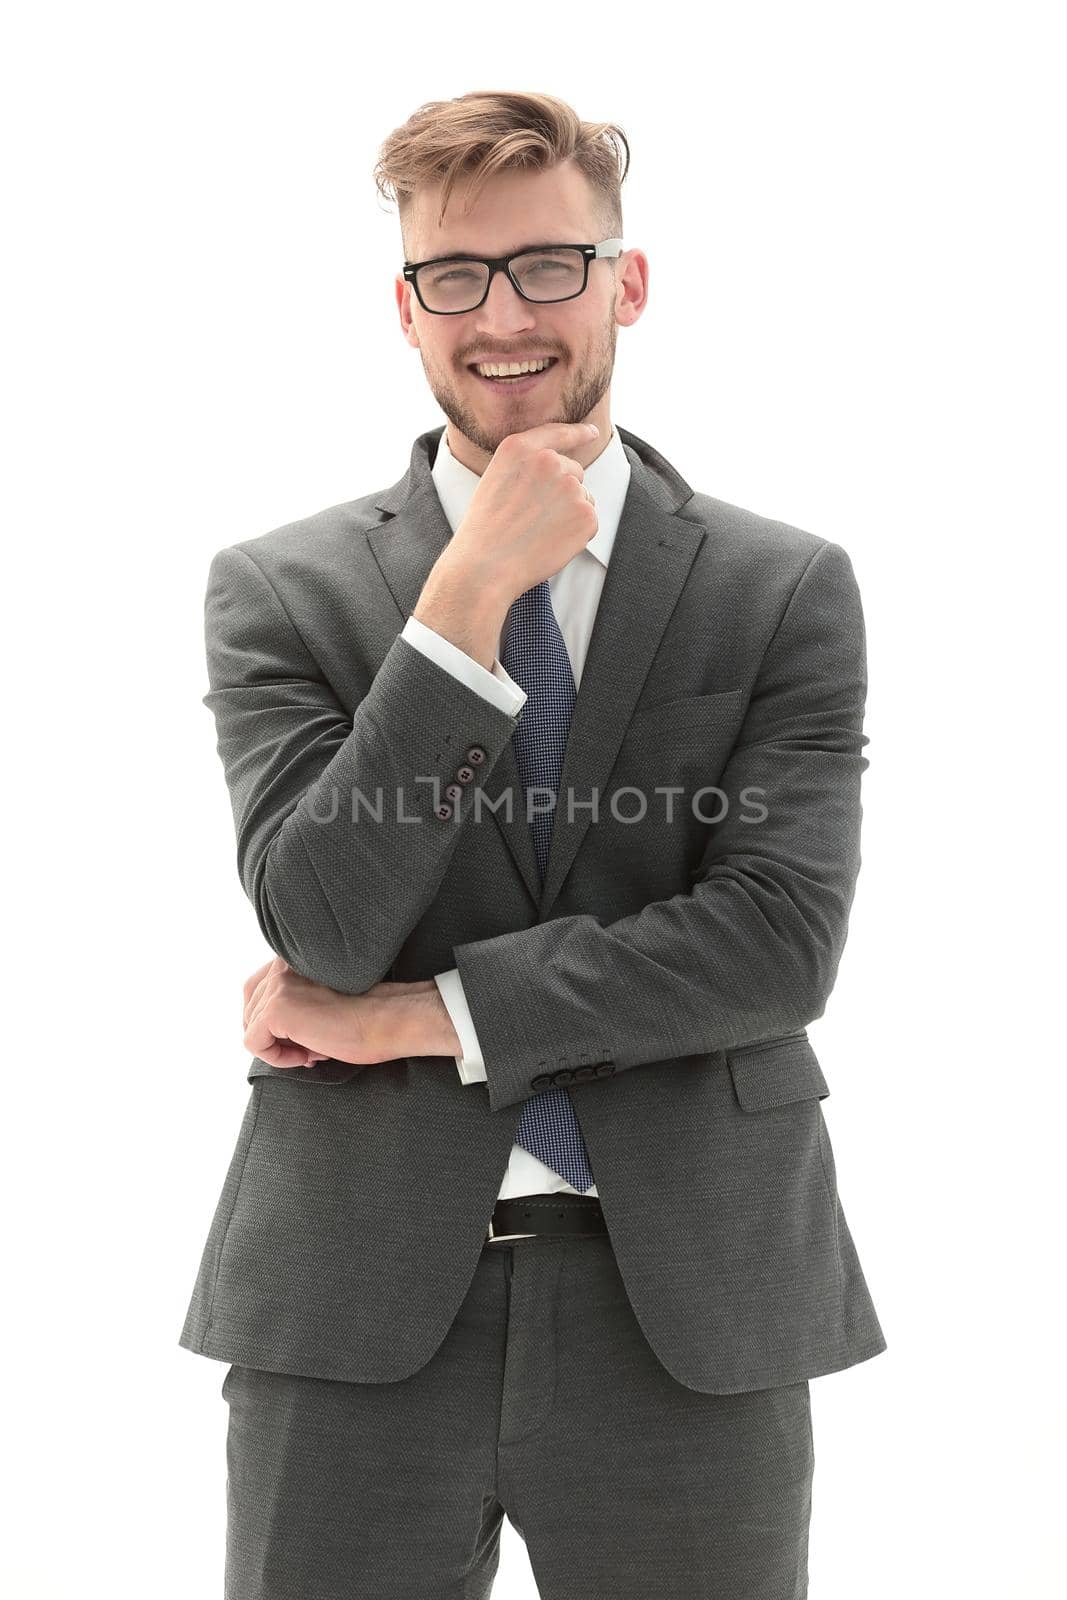 in full growth.portrait of a young thoughtful businessman.isolated on white background